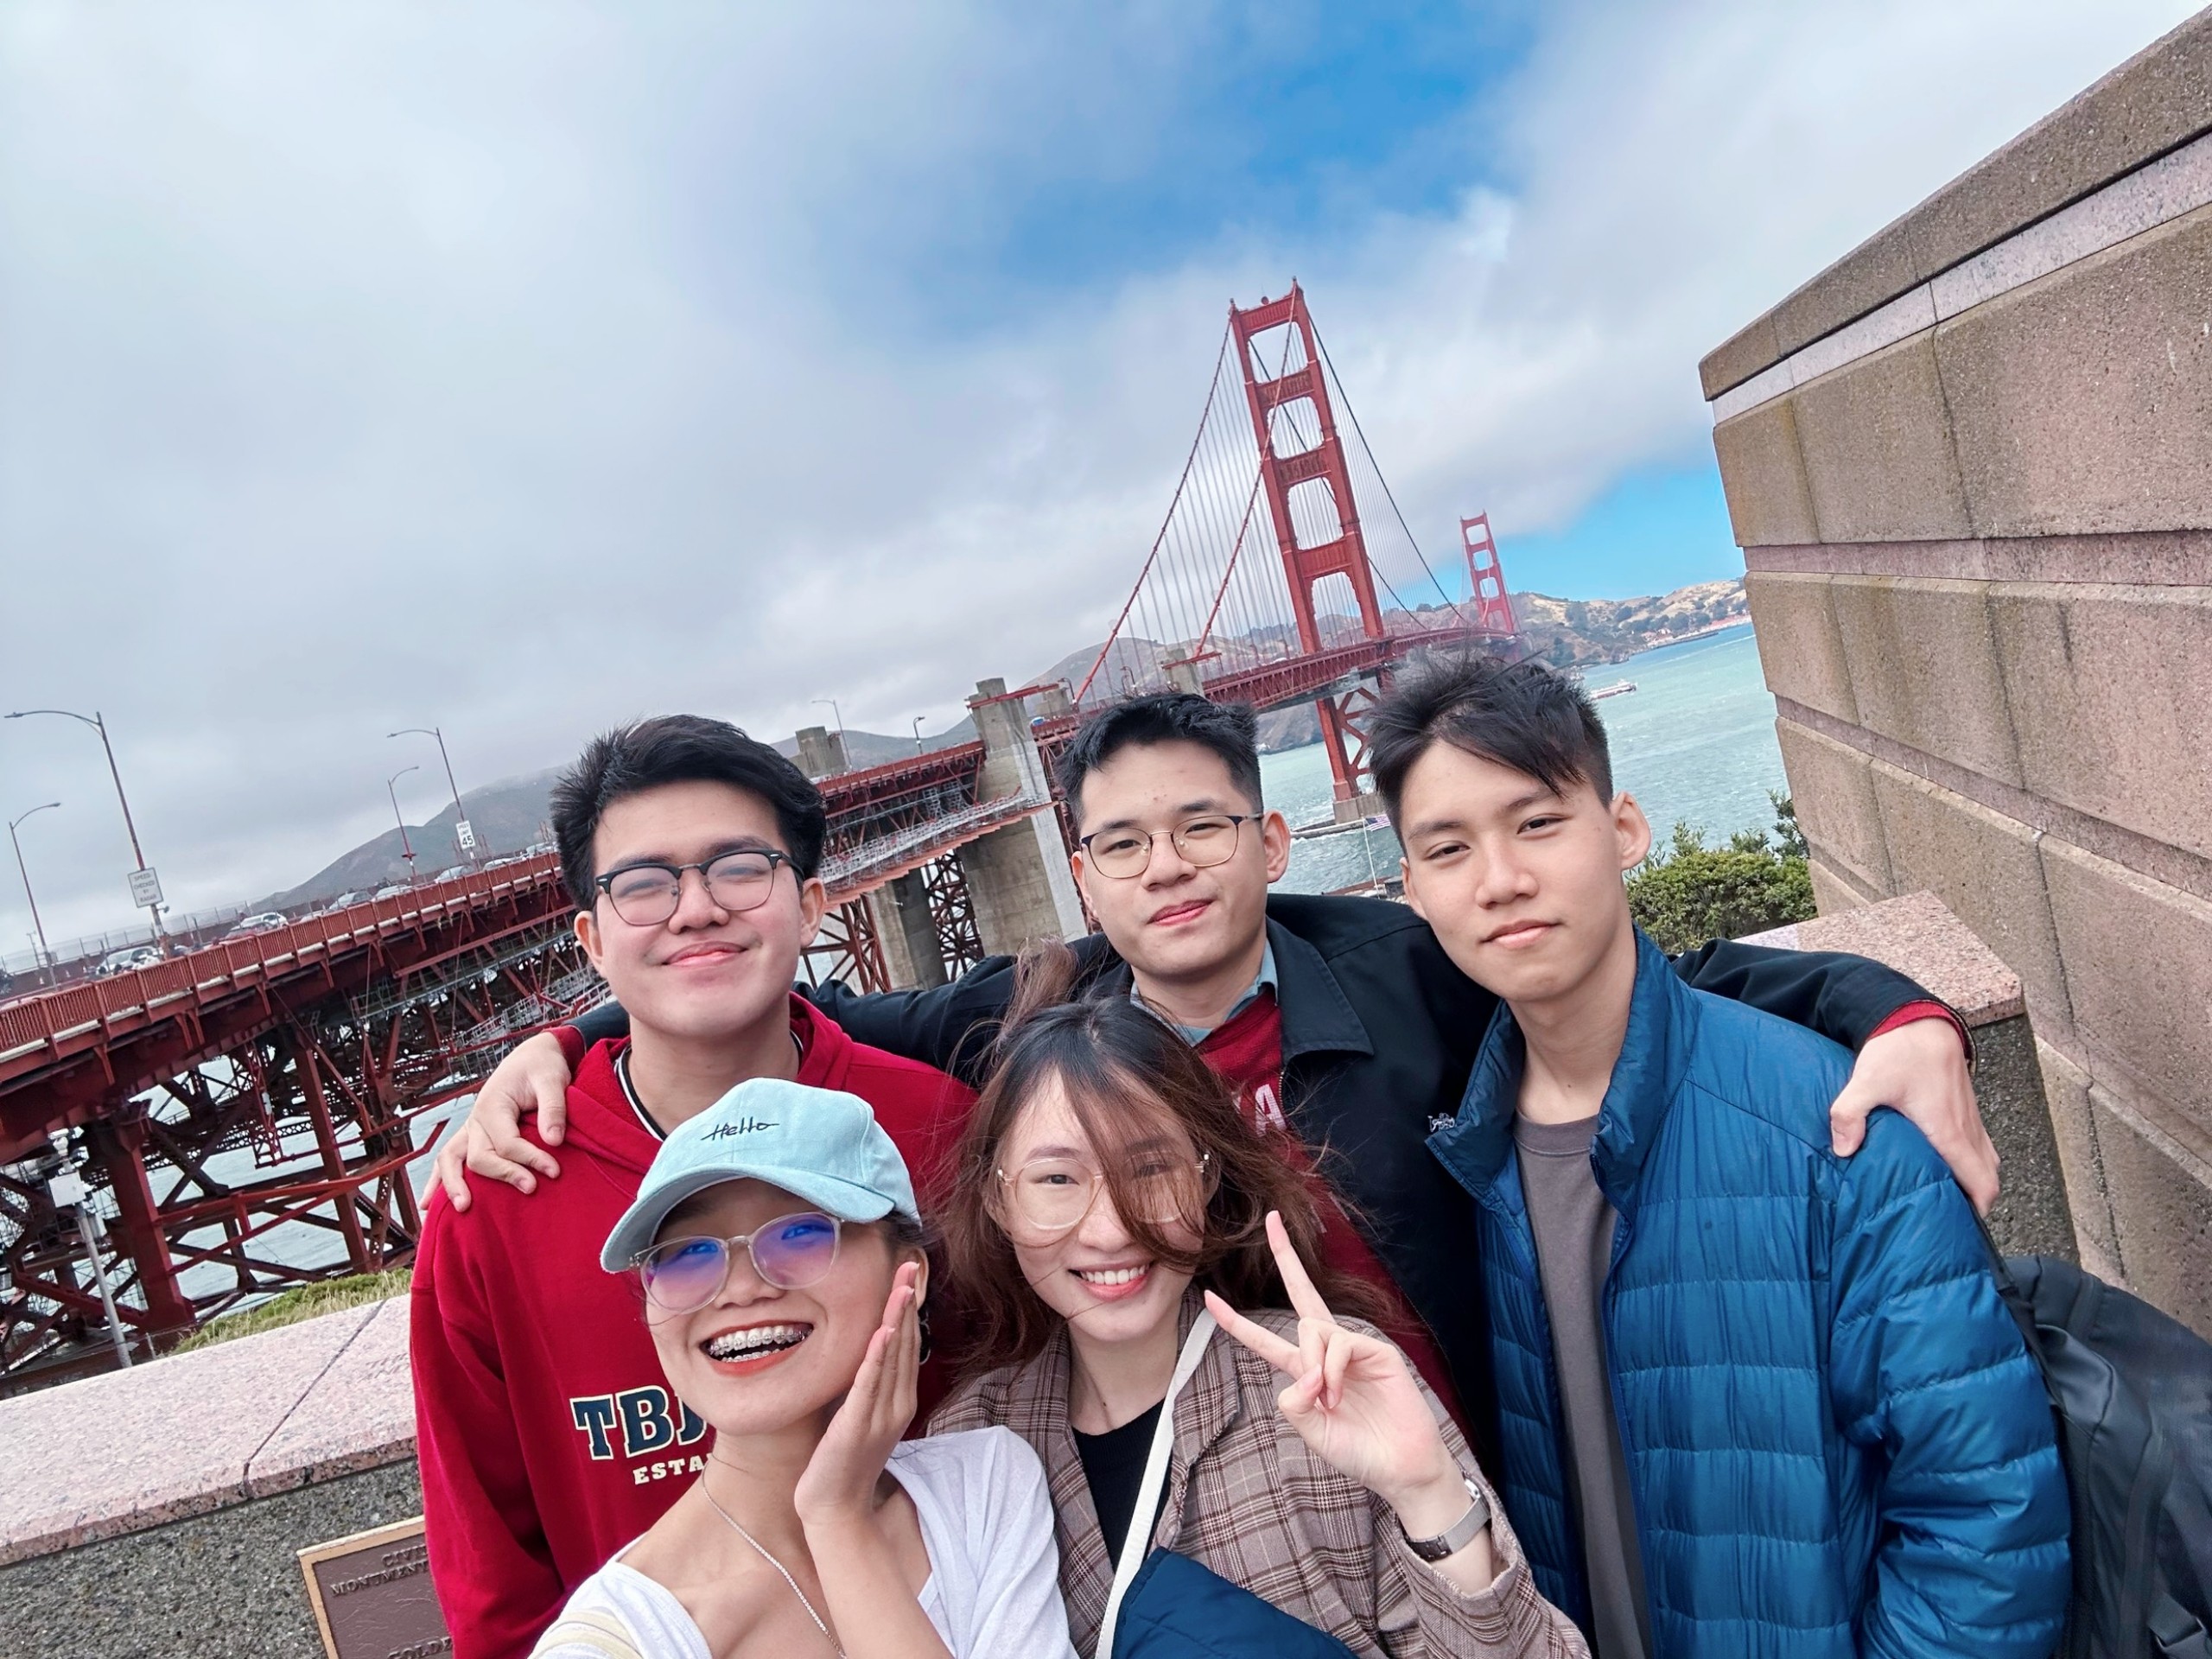 Kien and 4 other SVIC teammates on an outing trip during their program, posing in front of the Golden Gate Bridge